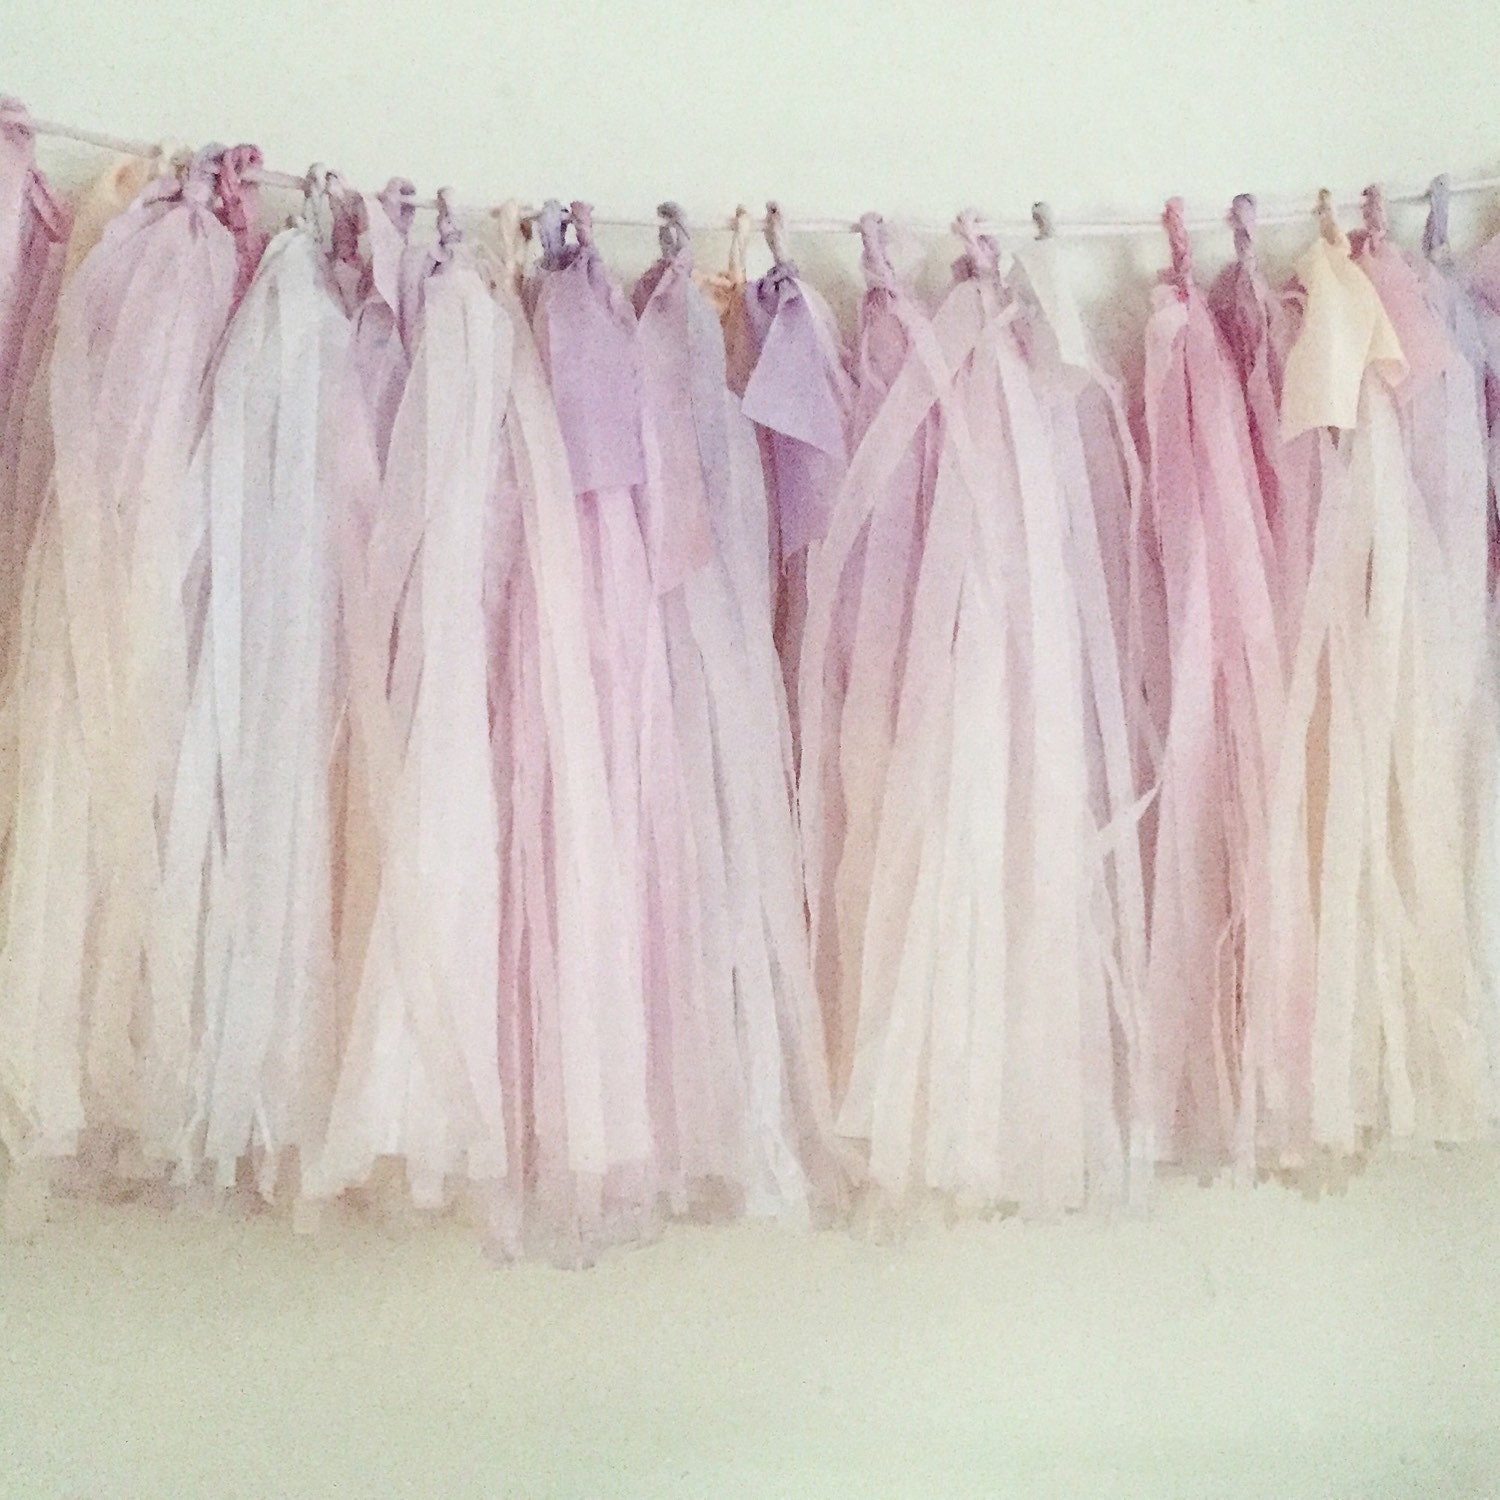 Lilac and Pink Champagne Ombré Hand-dyed Tissue Tassel Garland - Etsy